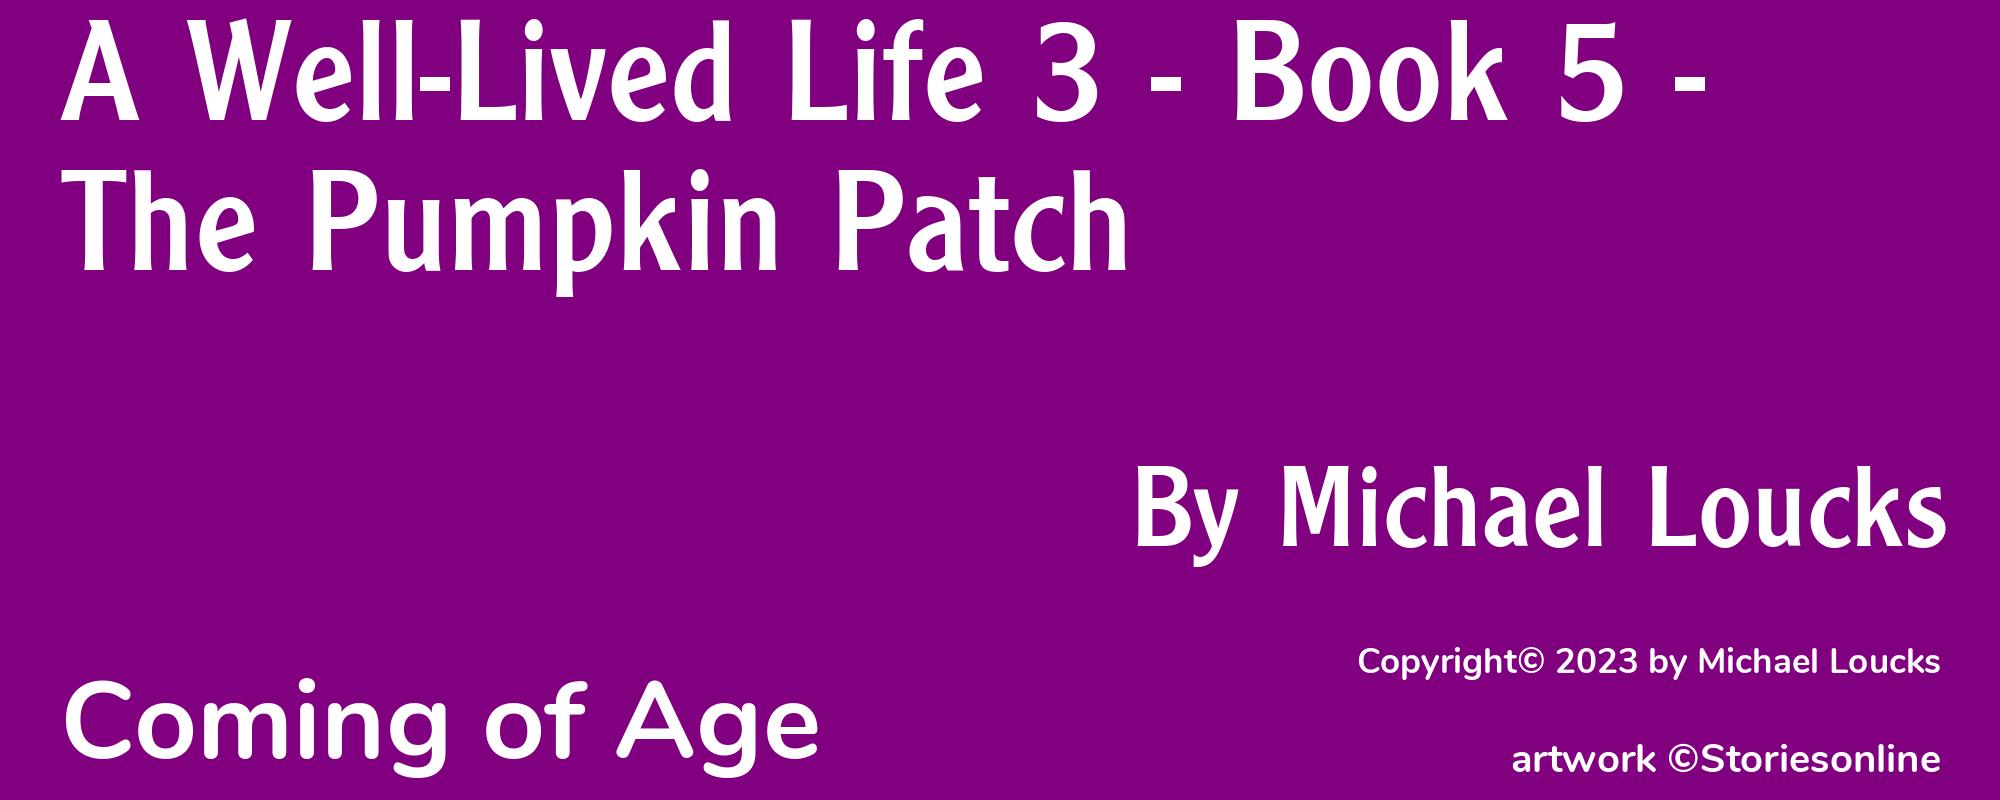 A Well-Lived Life 3 - Book 5 - The Pumpkin Patch - Cover